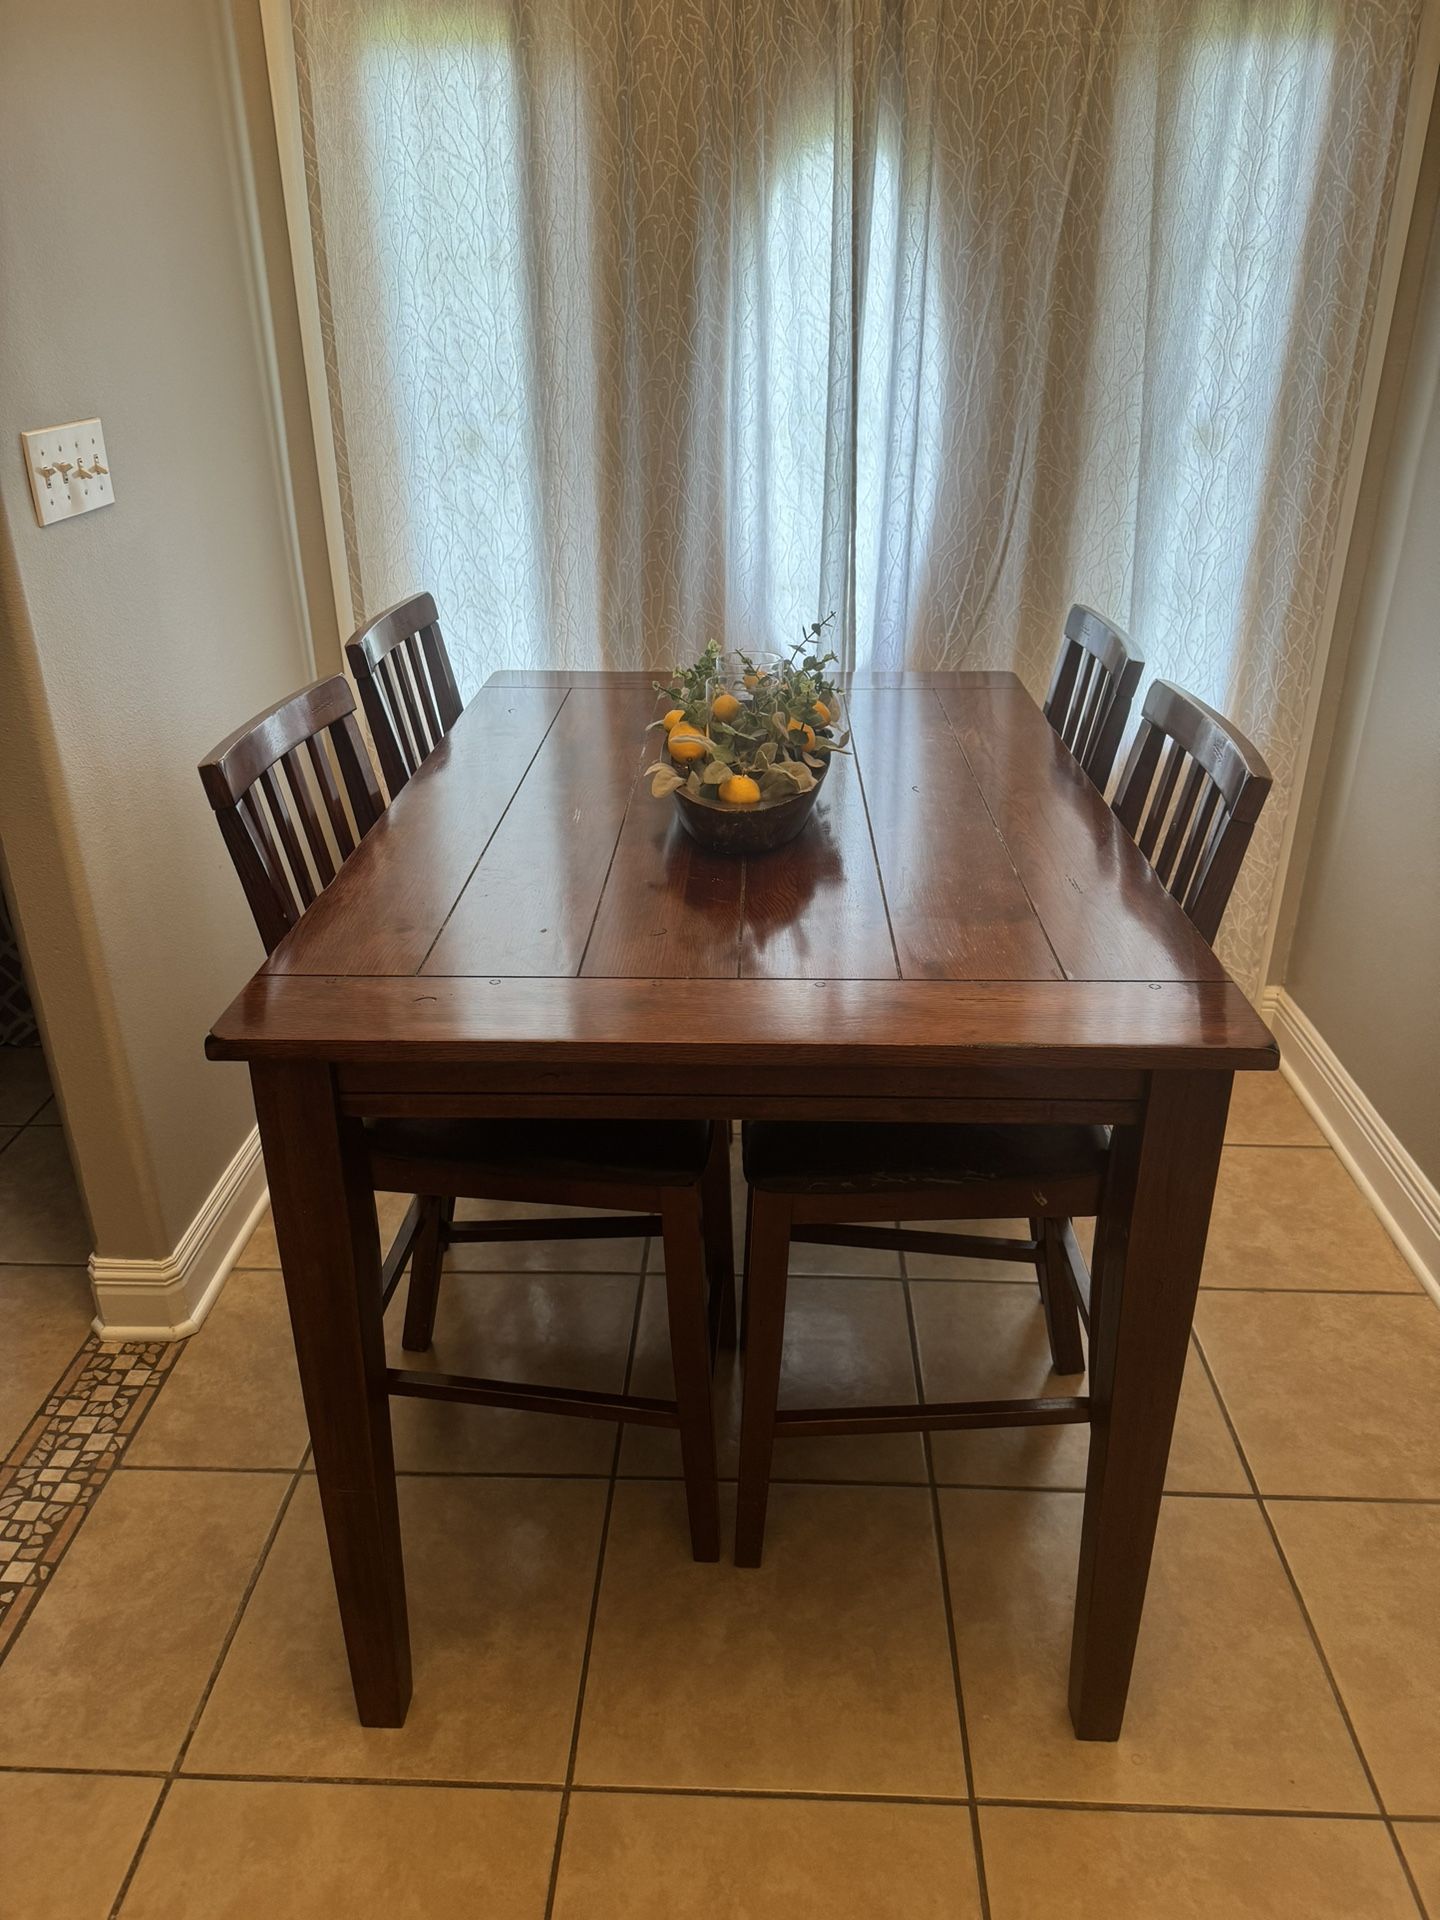 $175 Dining Table